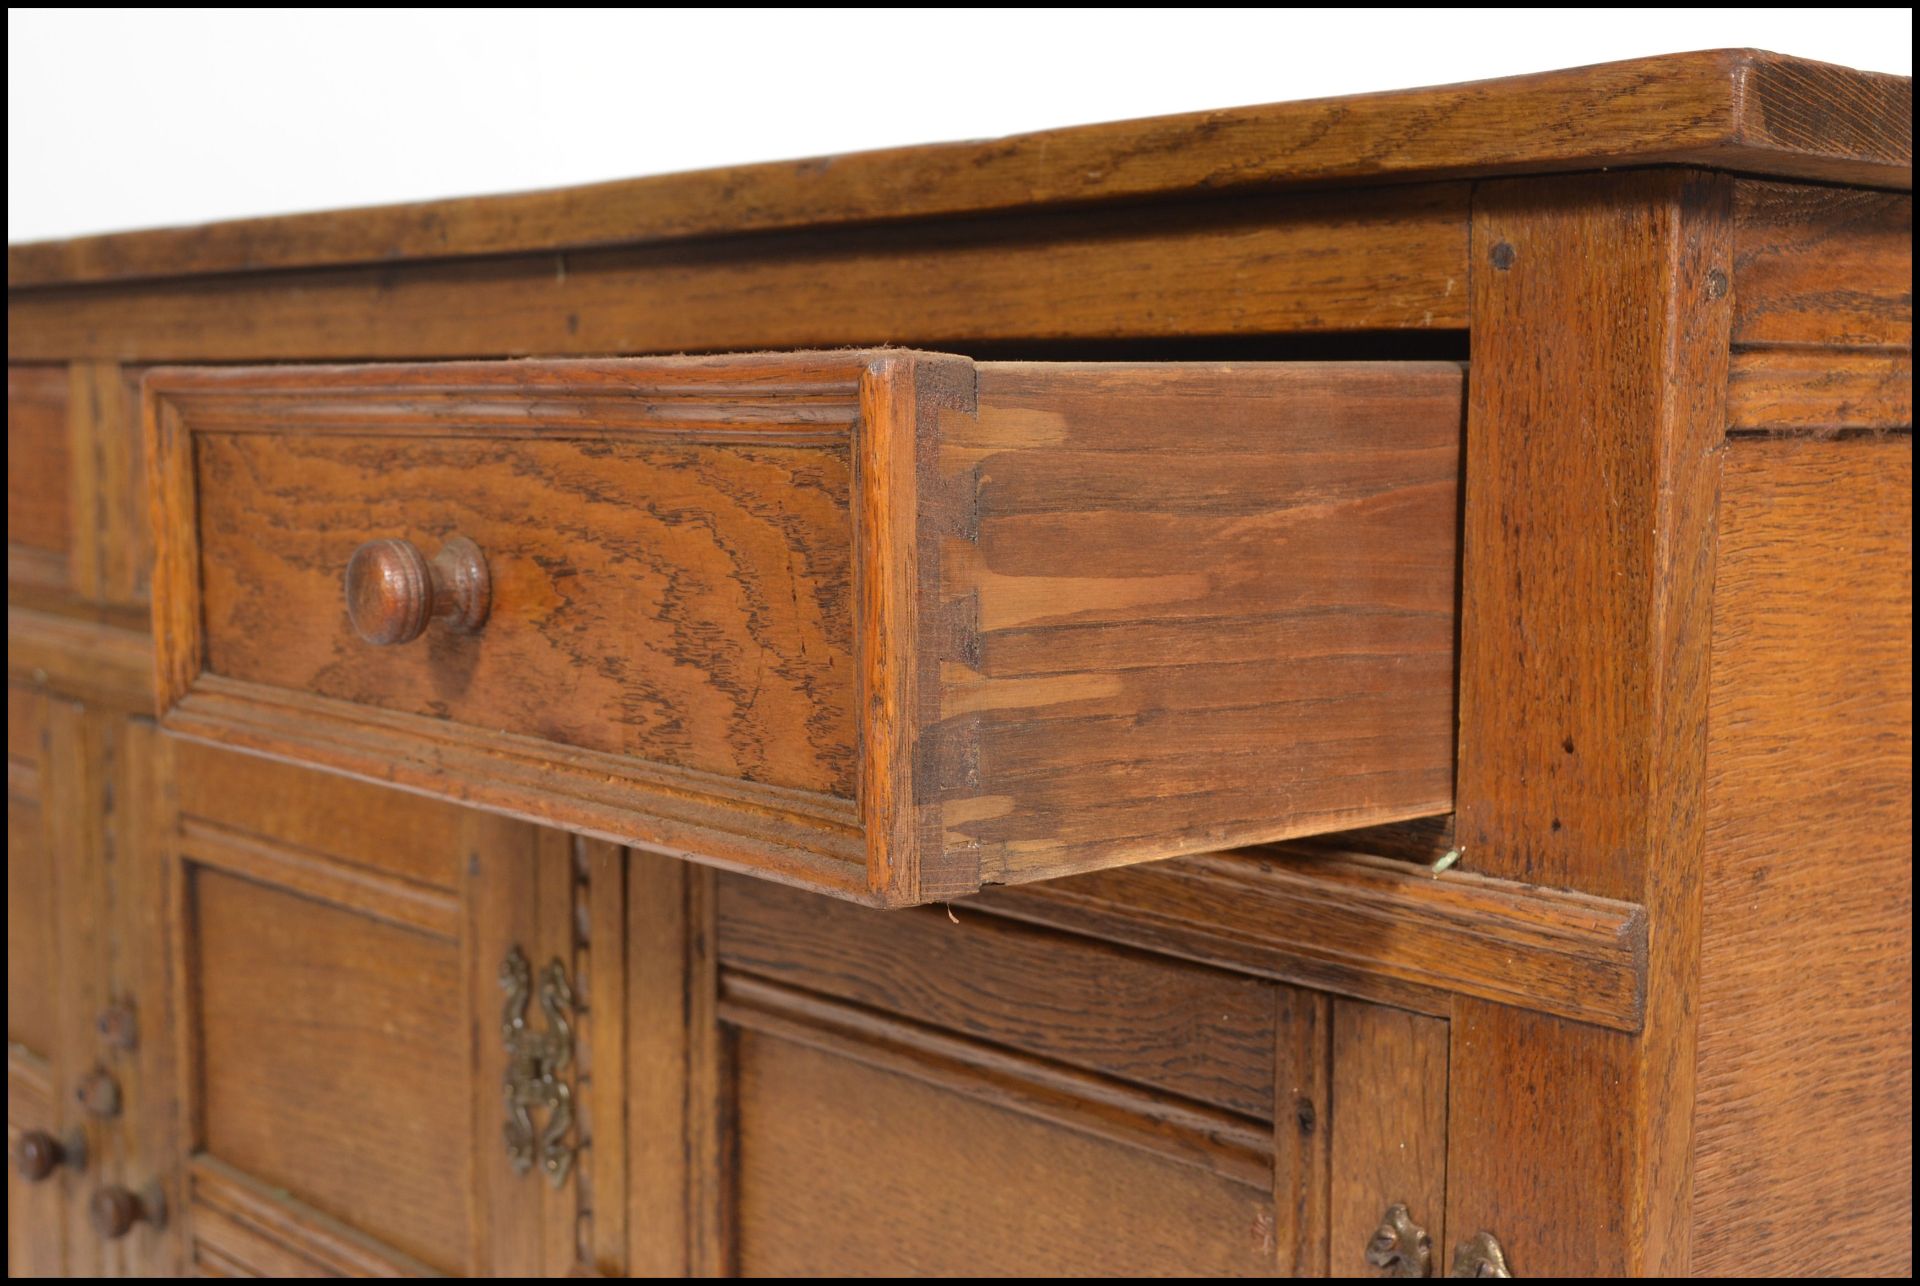 A 20th Century oak Jacobean revival sideboard credenza, flared top over a configuration of drawers - Image 4 of 6